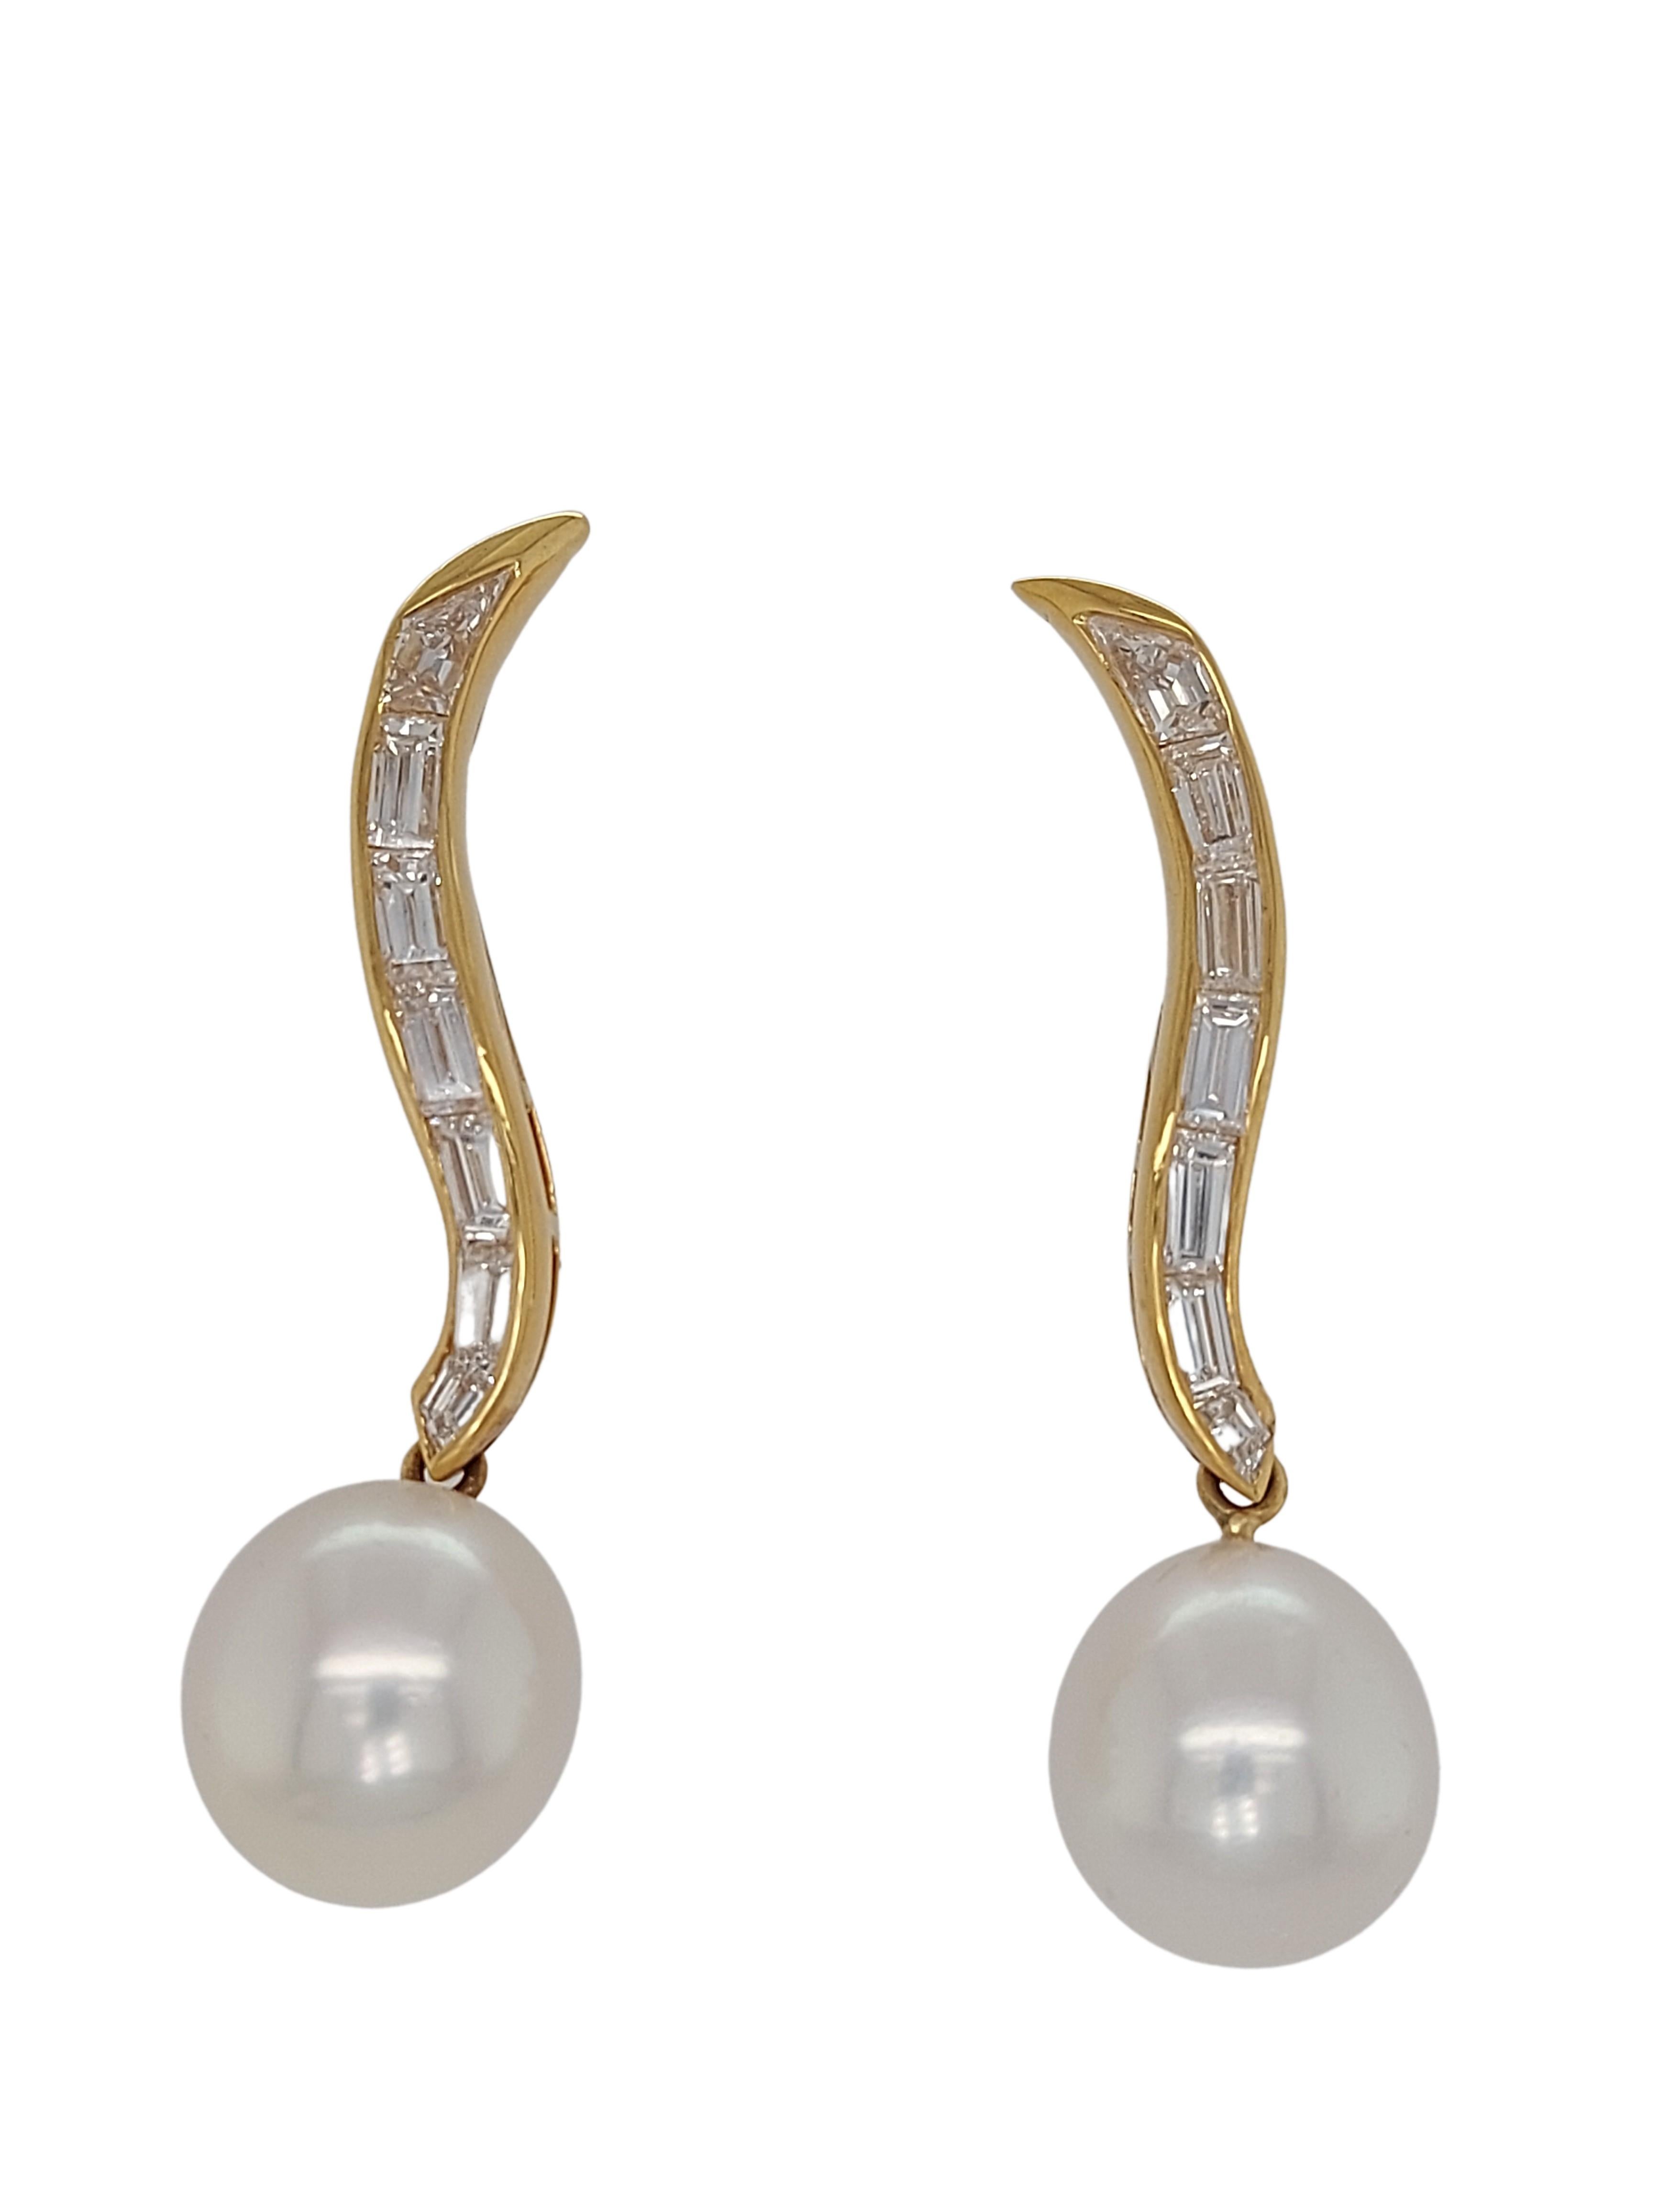 18kt Yellow Golden Earrings with Baguette Cut Diamonds & South Sea Pearls 

Diamonds: 14 Baguette cut diamonds  D/E Loupe Clean

Pearls: 11.8 mm diameter pearl

Material: 18kt yellow gold

Total weight: 11.8 grams / 0,415 oz / 7.6 dwt

Measurements: